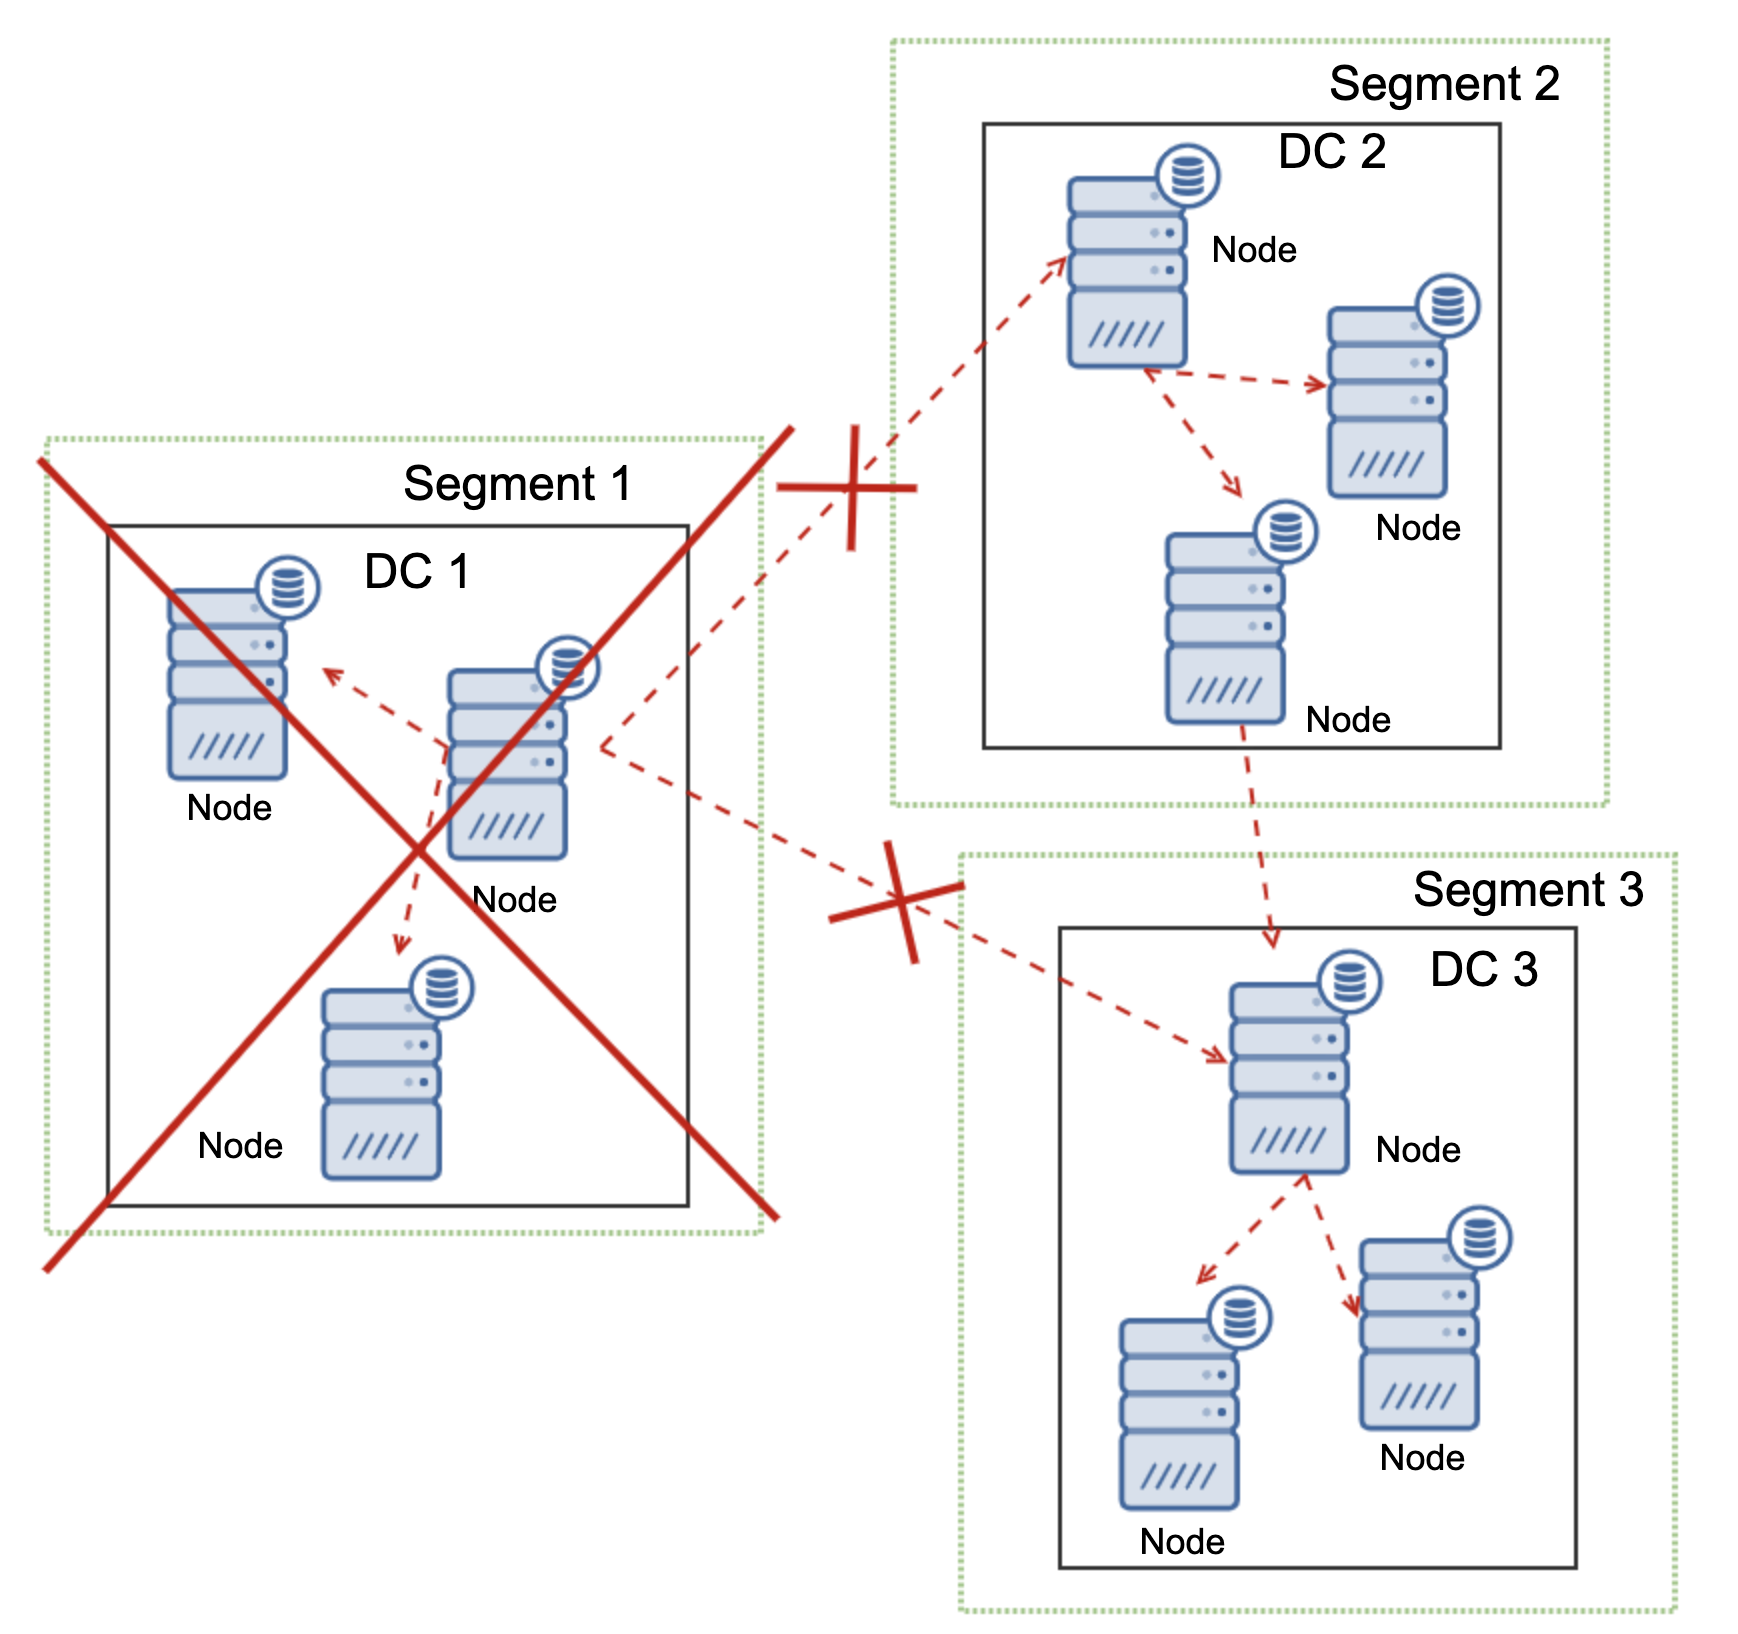 Why Use MariaDB Cluster for Geo-Distributed Environments?